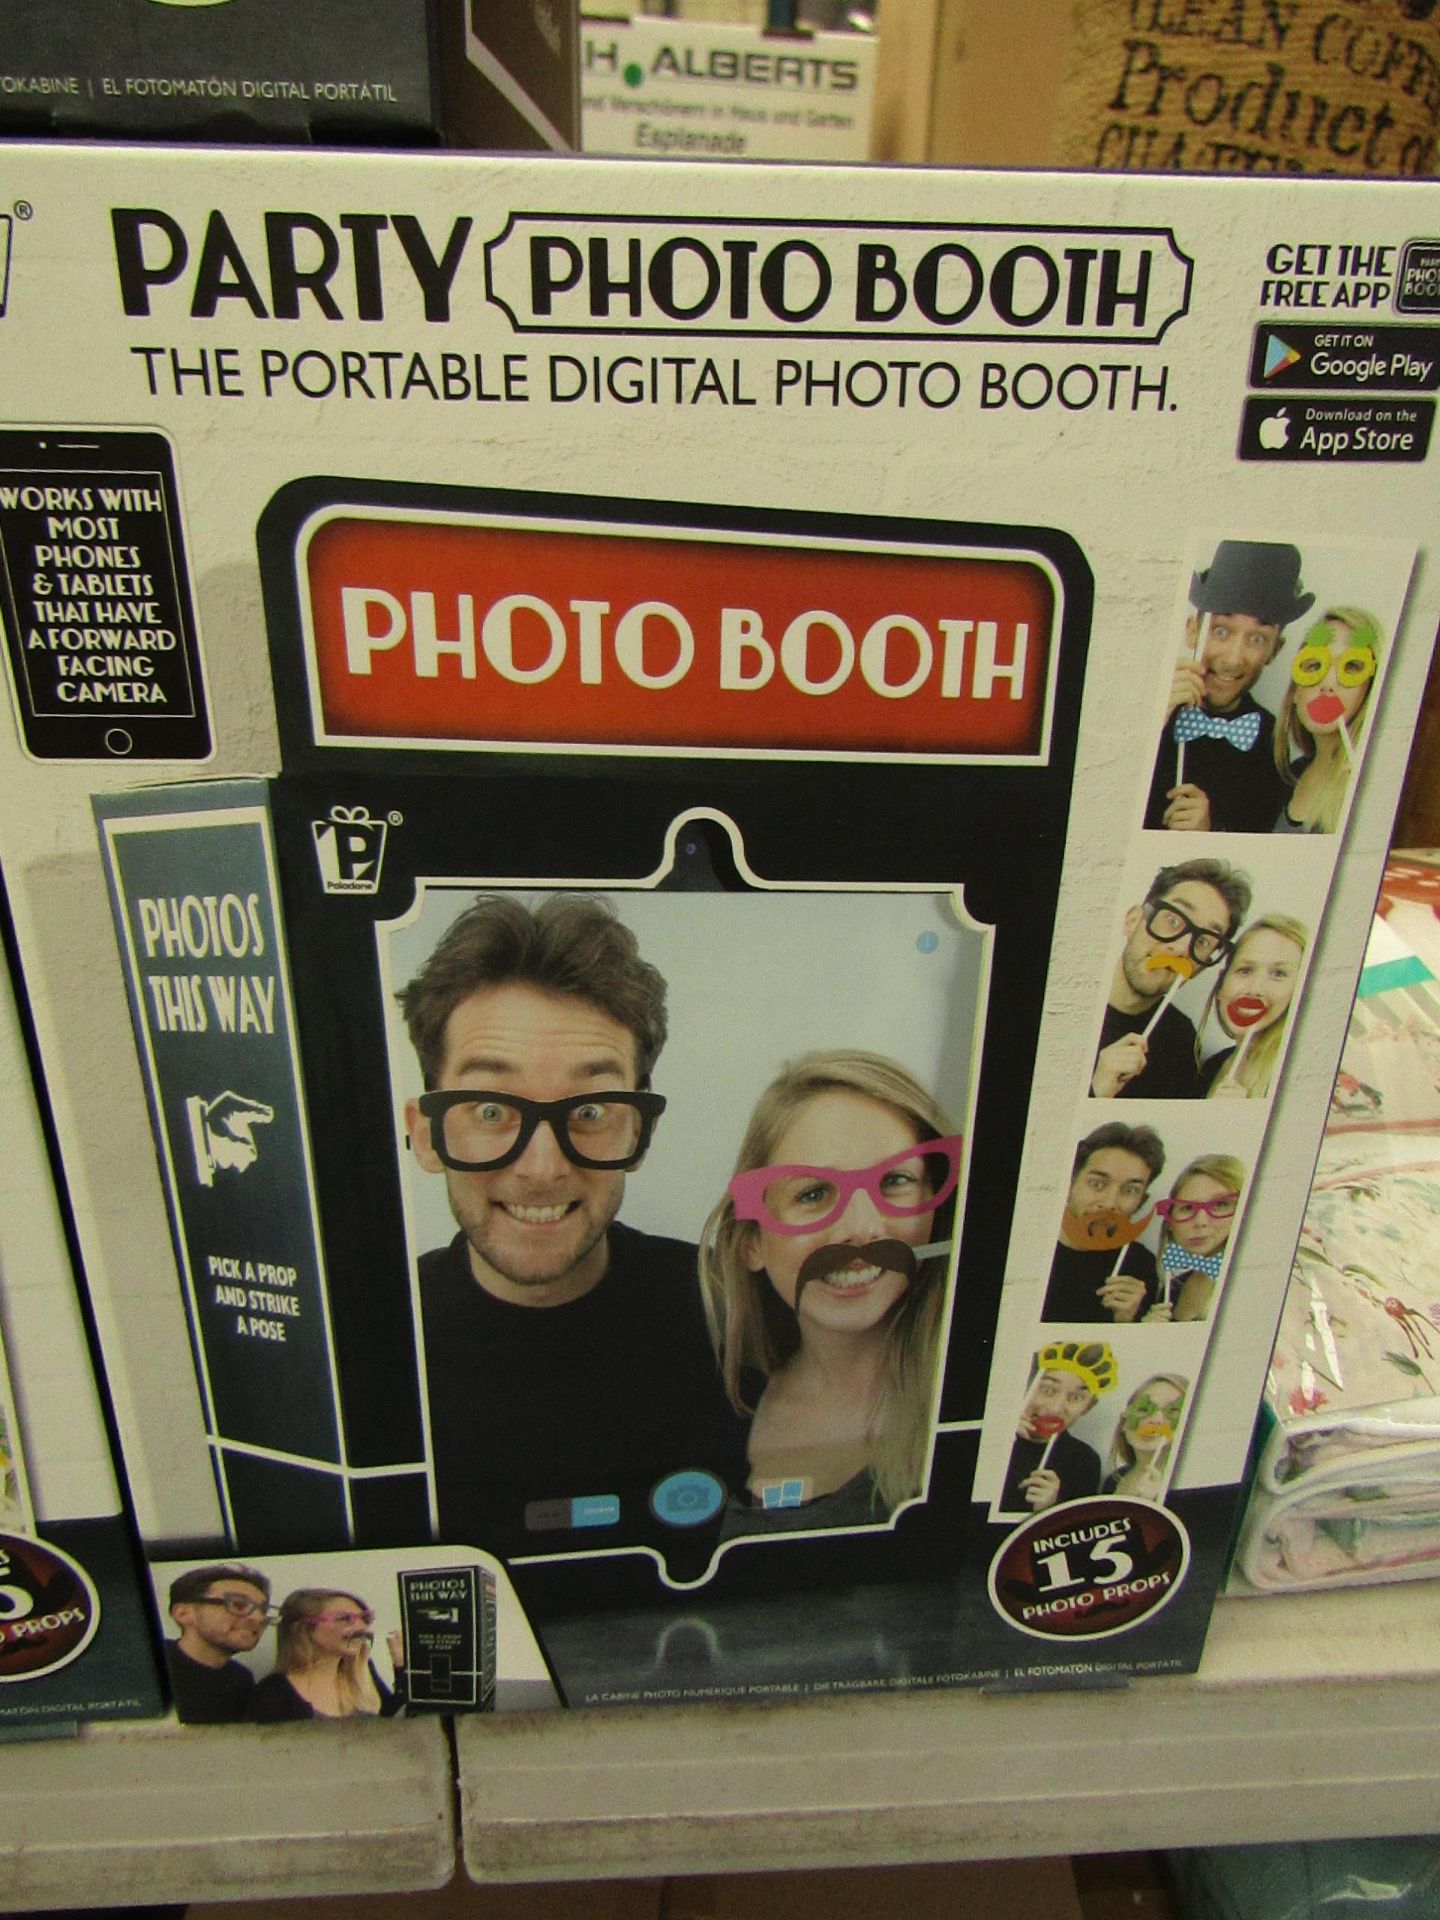 Paladone - Partry Photo Booth - Portable Digital Photo Booth - Look New & Boxed.